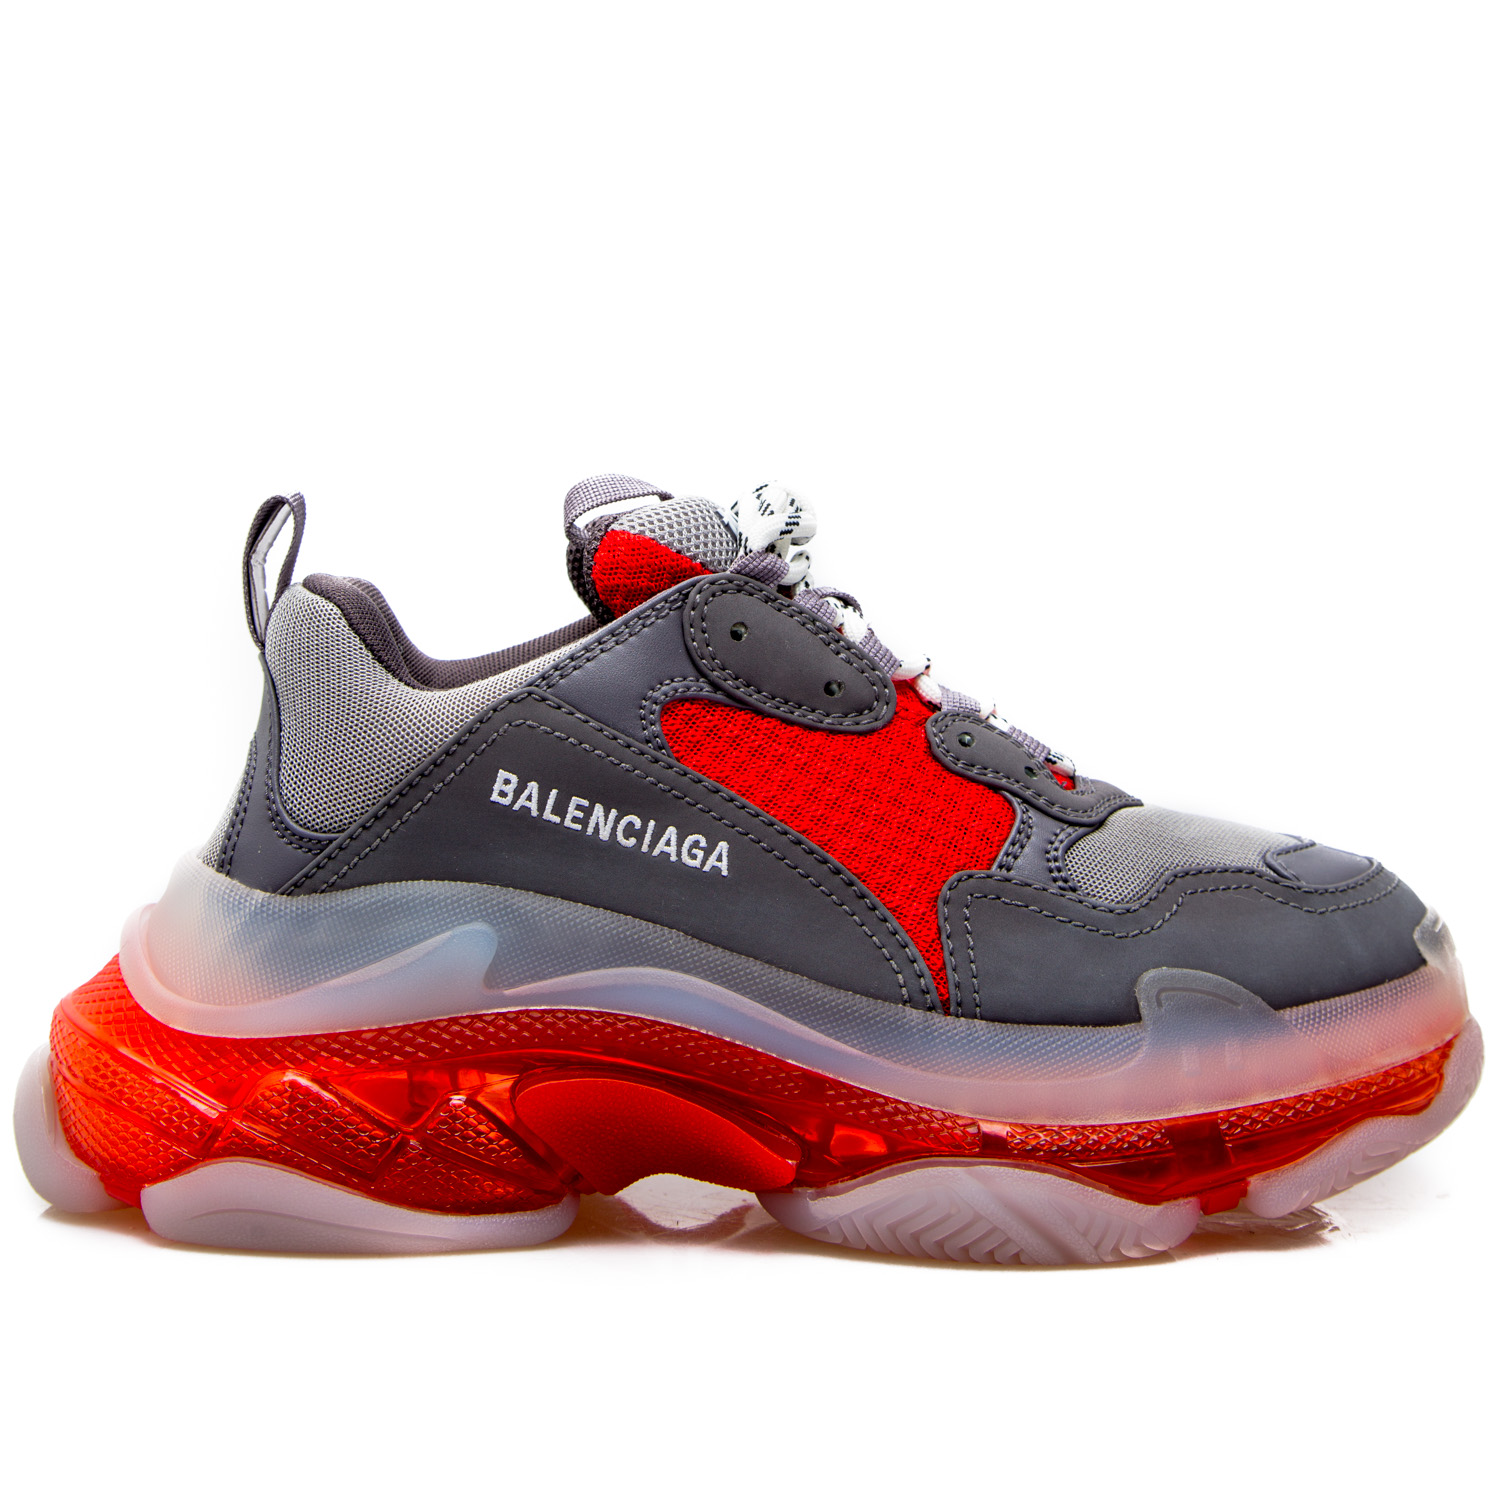 Sneakers grey and blue Balenciaga Triple S Chris Brown on